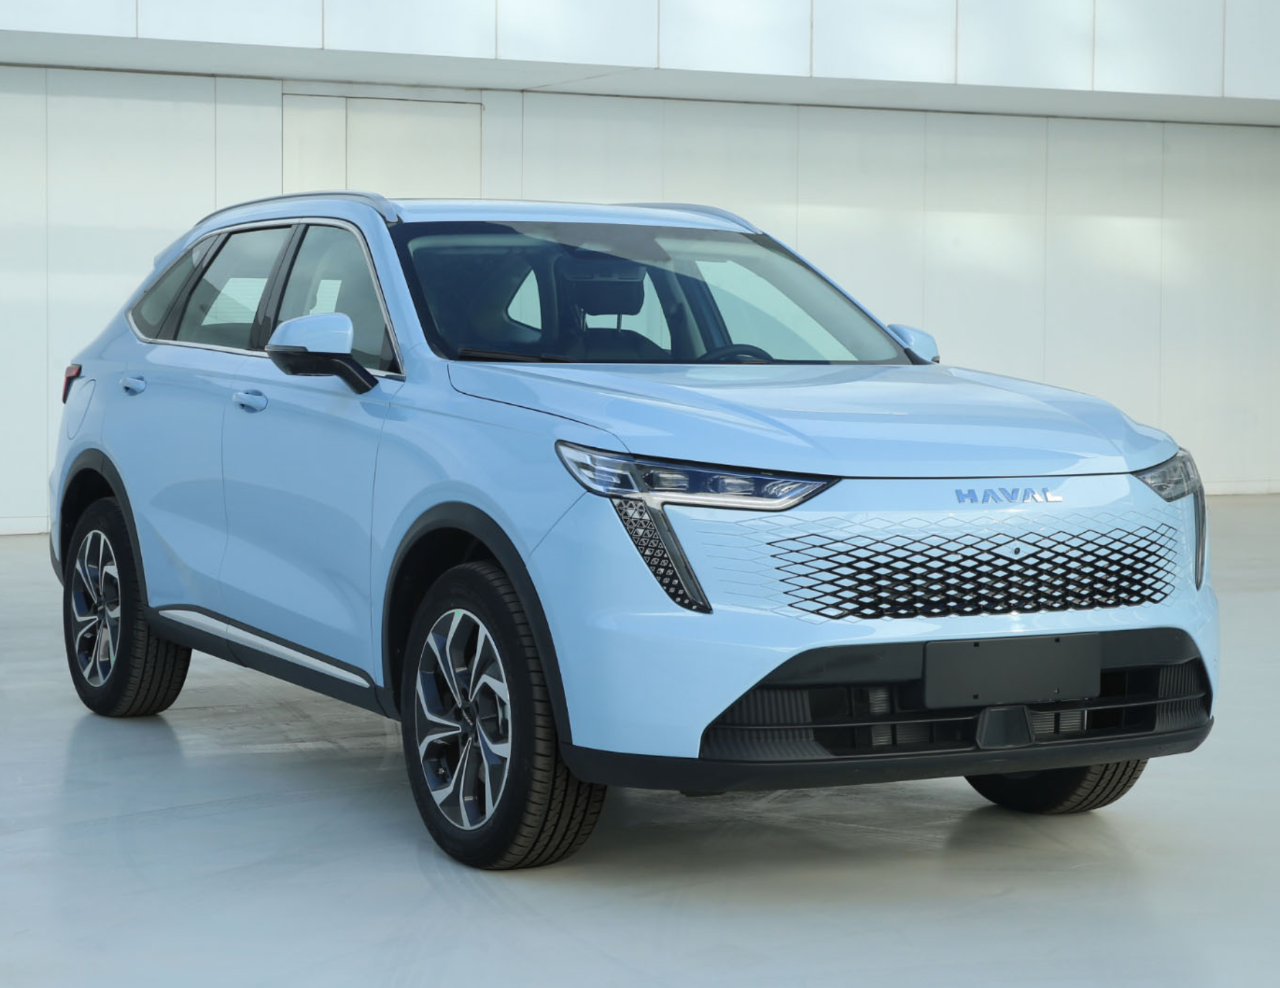 Haval's new plug-in hybrid model, potentially named "Xiaolong" (code B07)